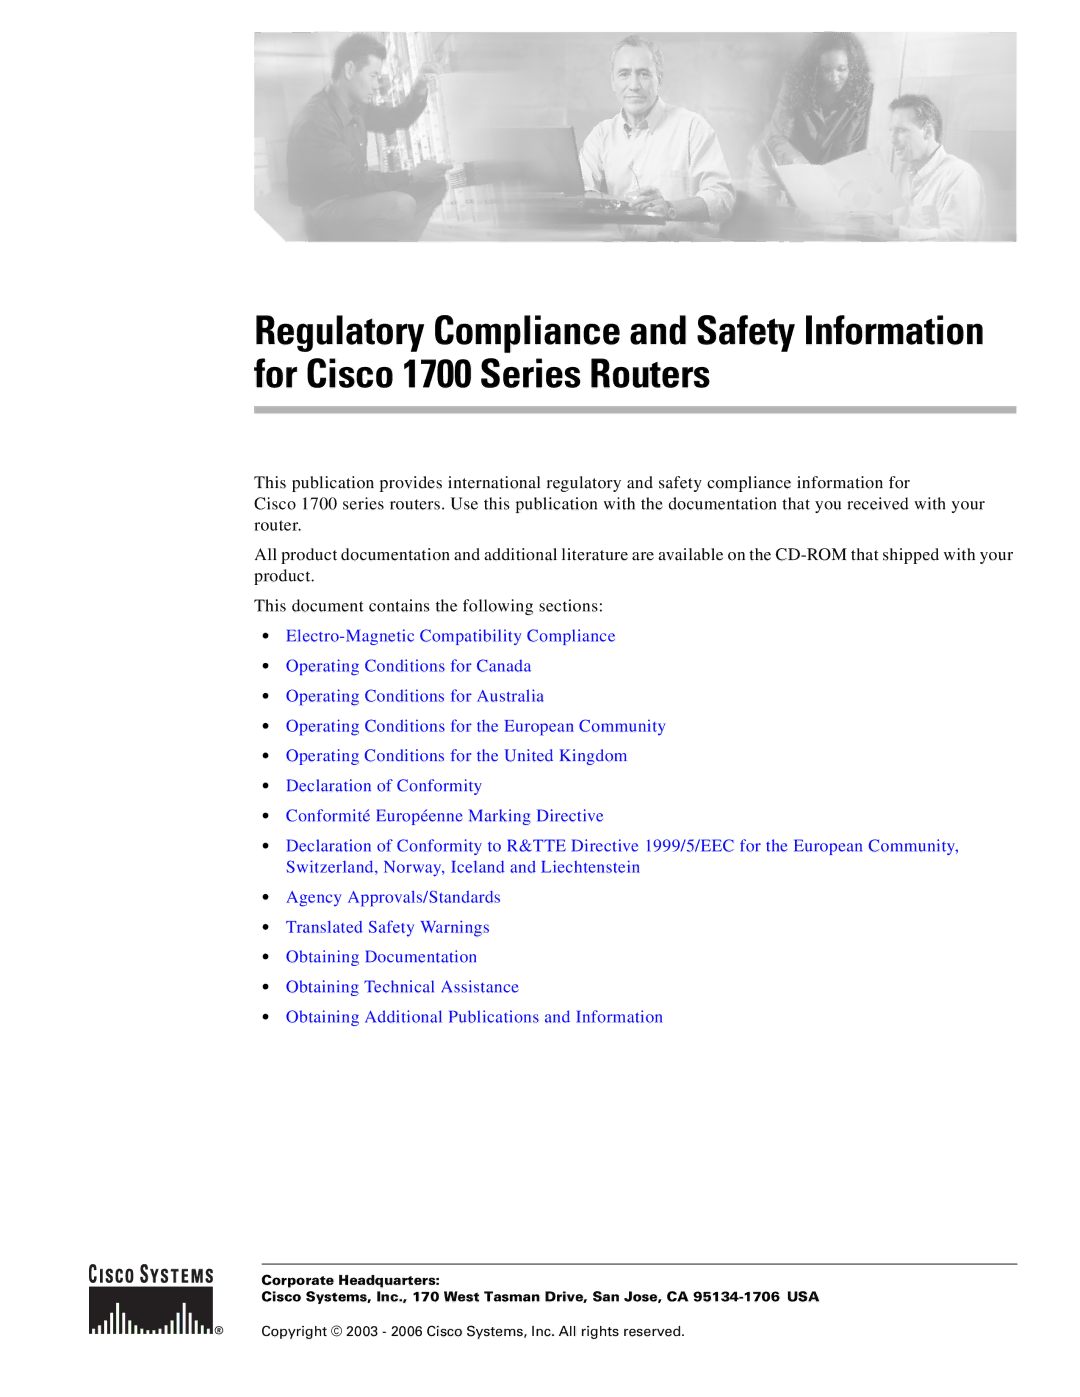 Cisco Systems Cisco 1700 manual Copyright 2003 2006 Cisco Systems, Inc. All rights reserved 